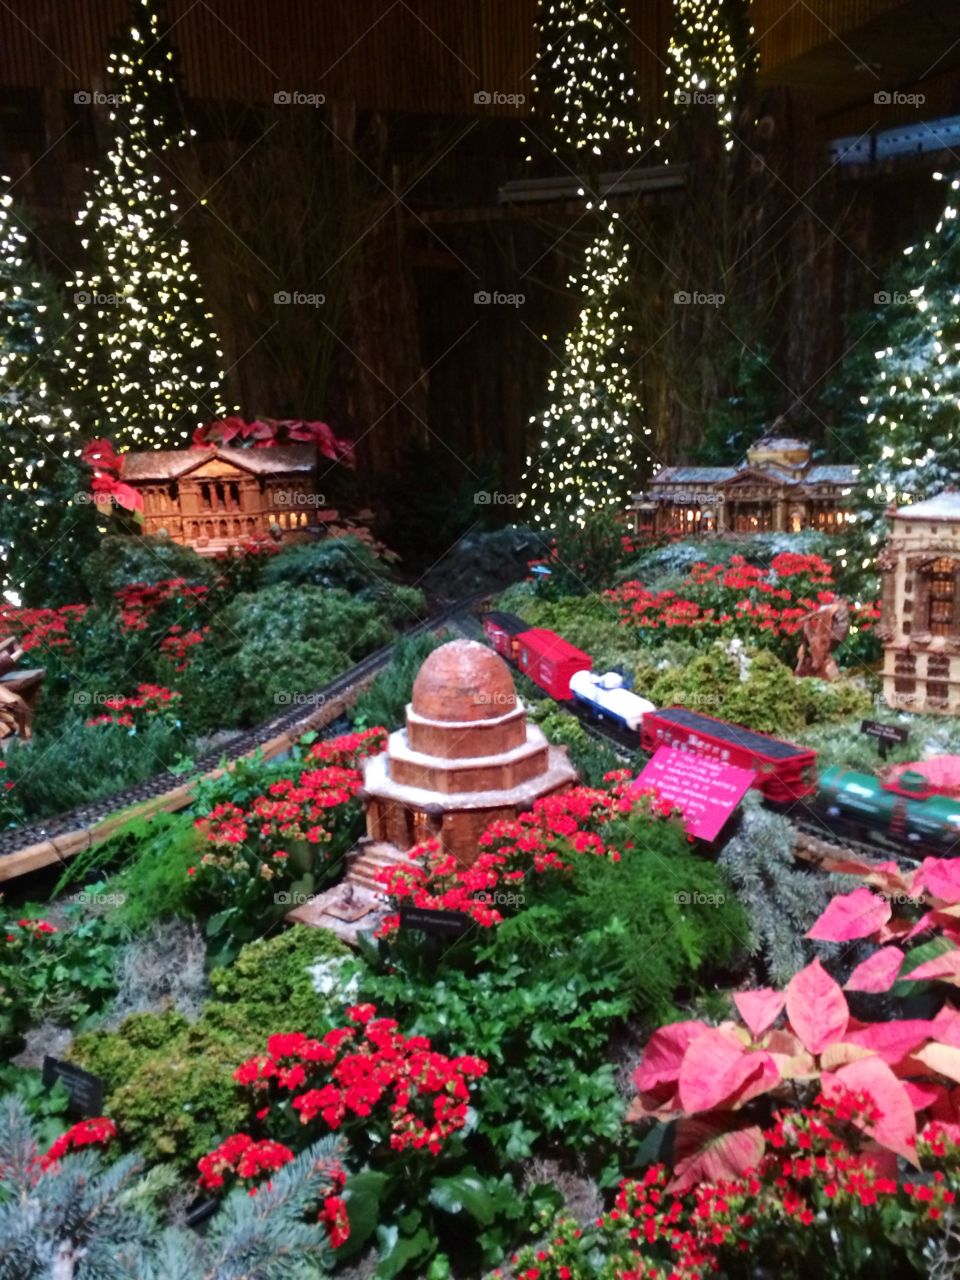 Magical train journey . The Christmas model  railroad set  at Chicago botanical gardens 